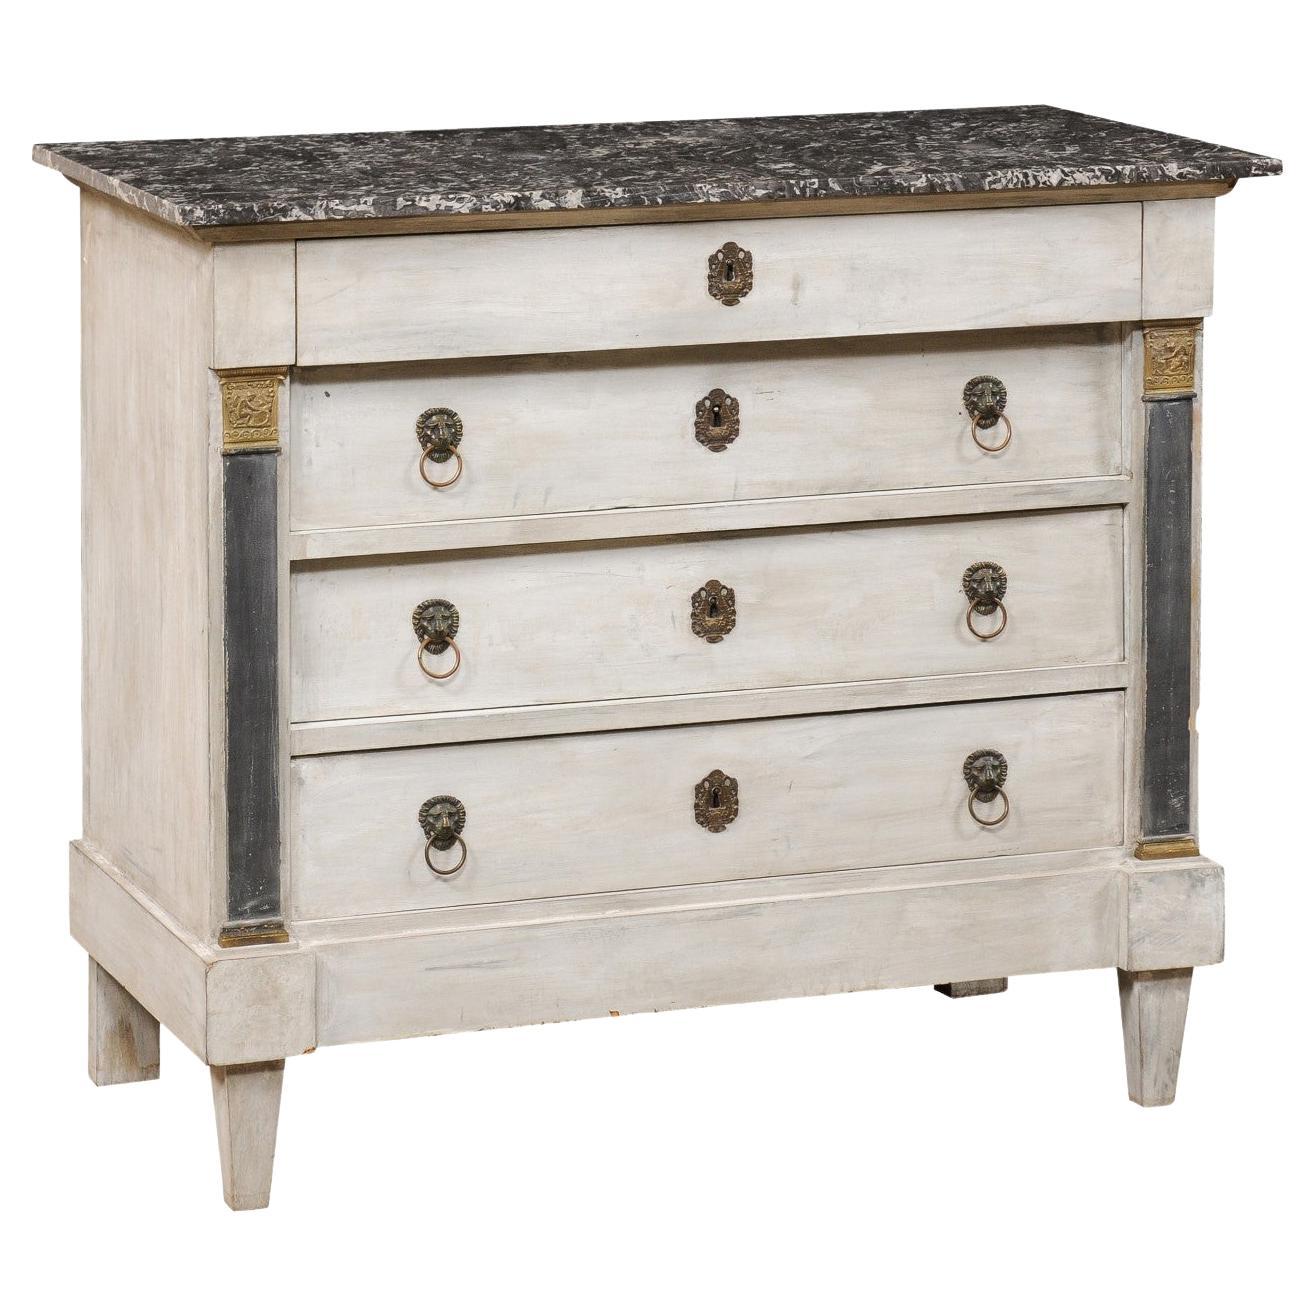 19th C. Neoclassic French Painted Commode W/Marble Top & Lion's Head Ring Pulls For Sale